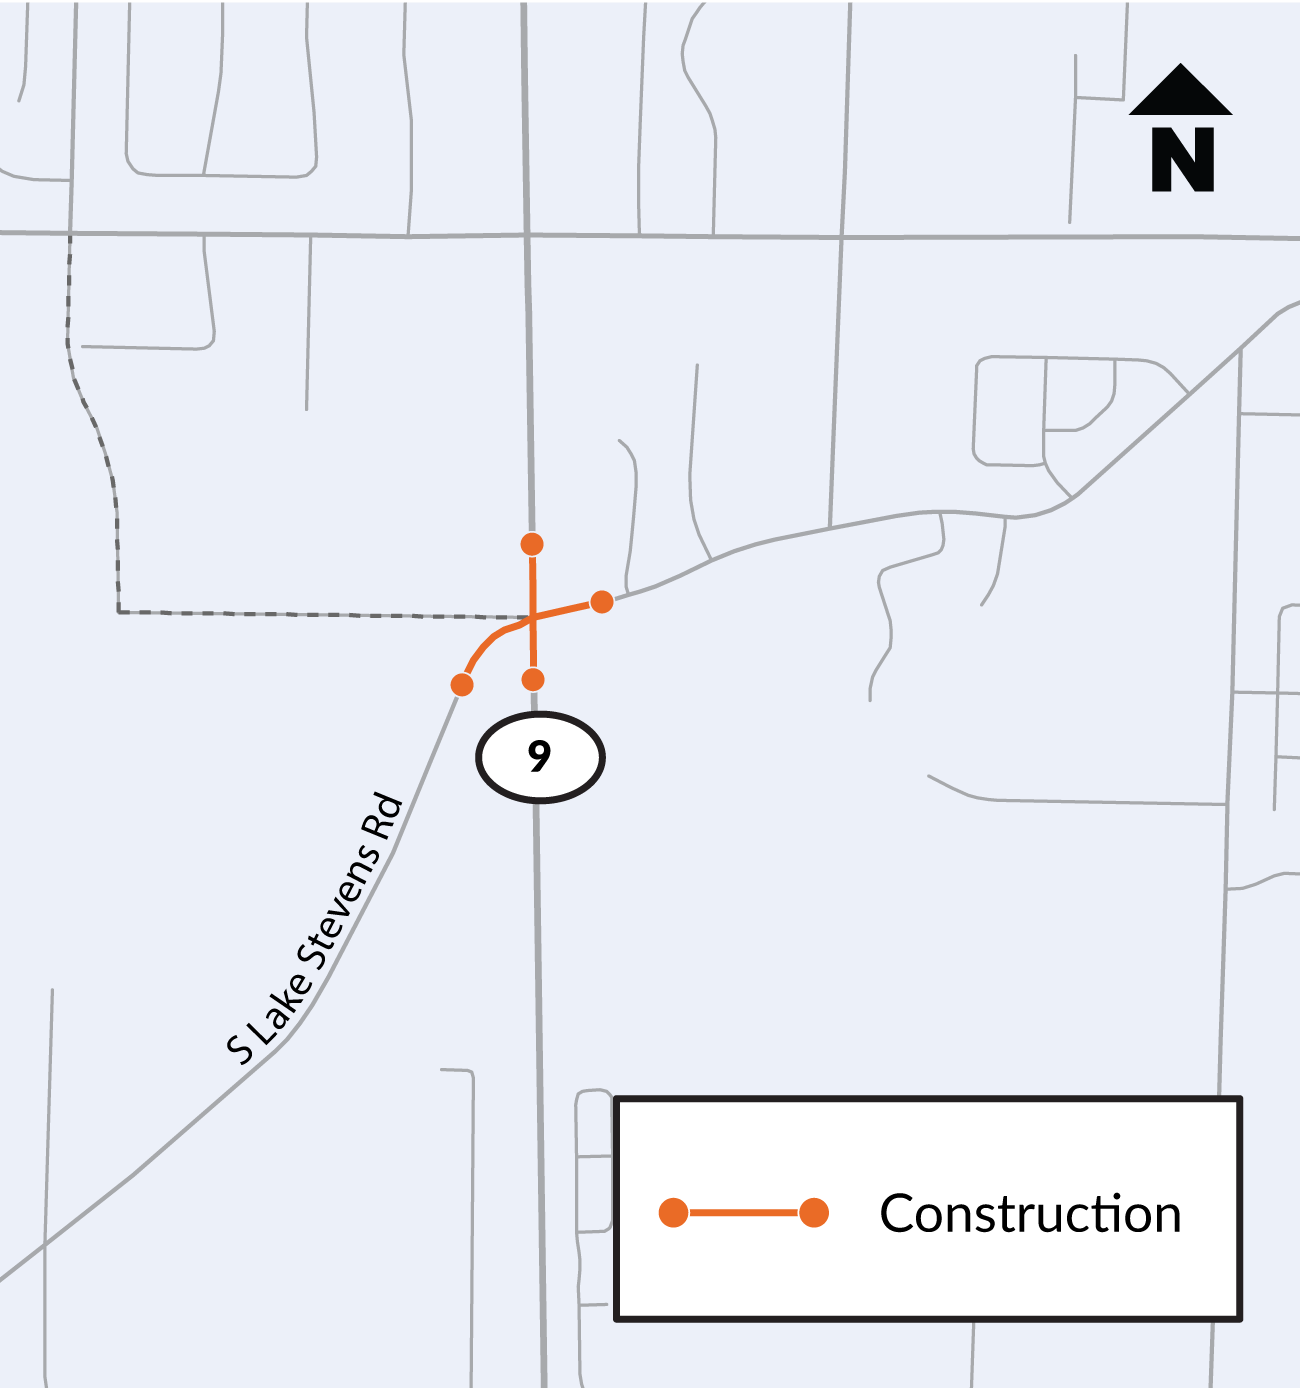 SR 9/South Lake Stevens Road Intersection Improvements Complete May